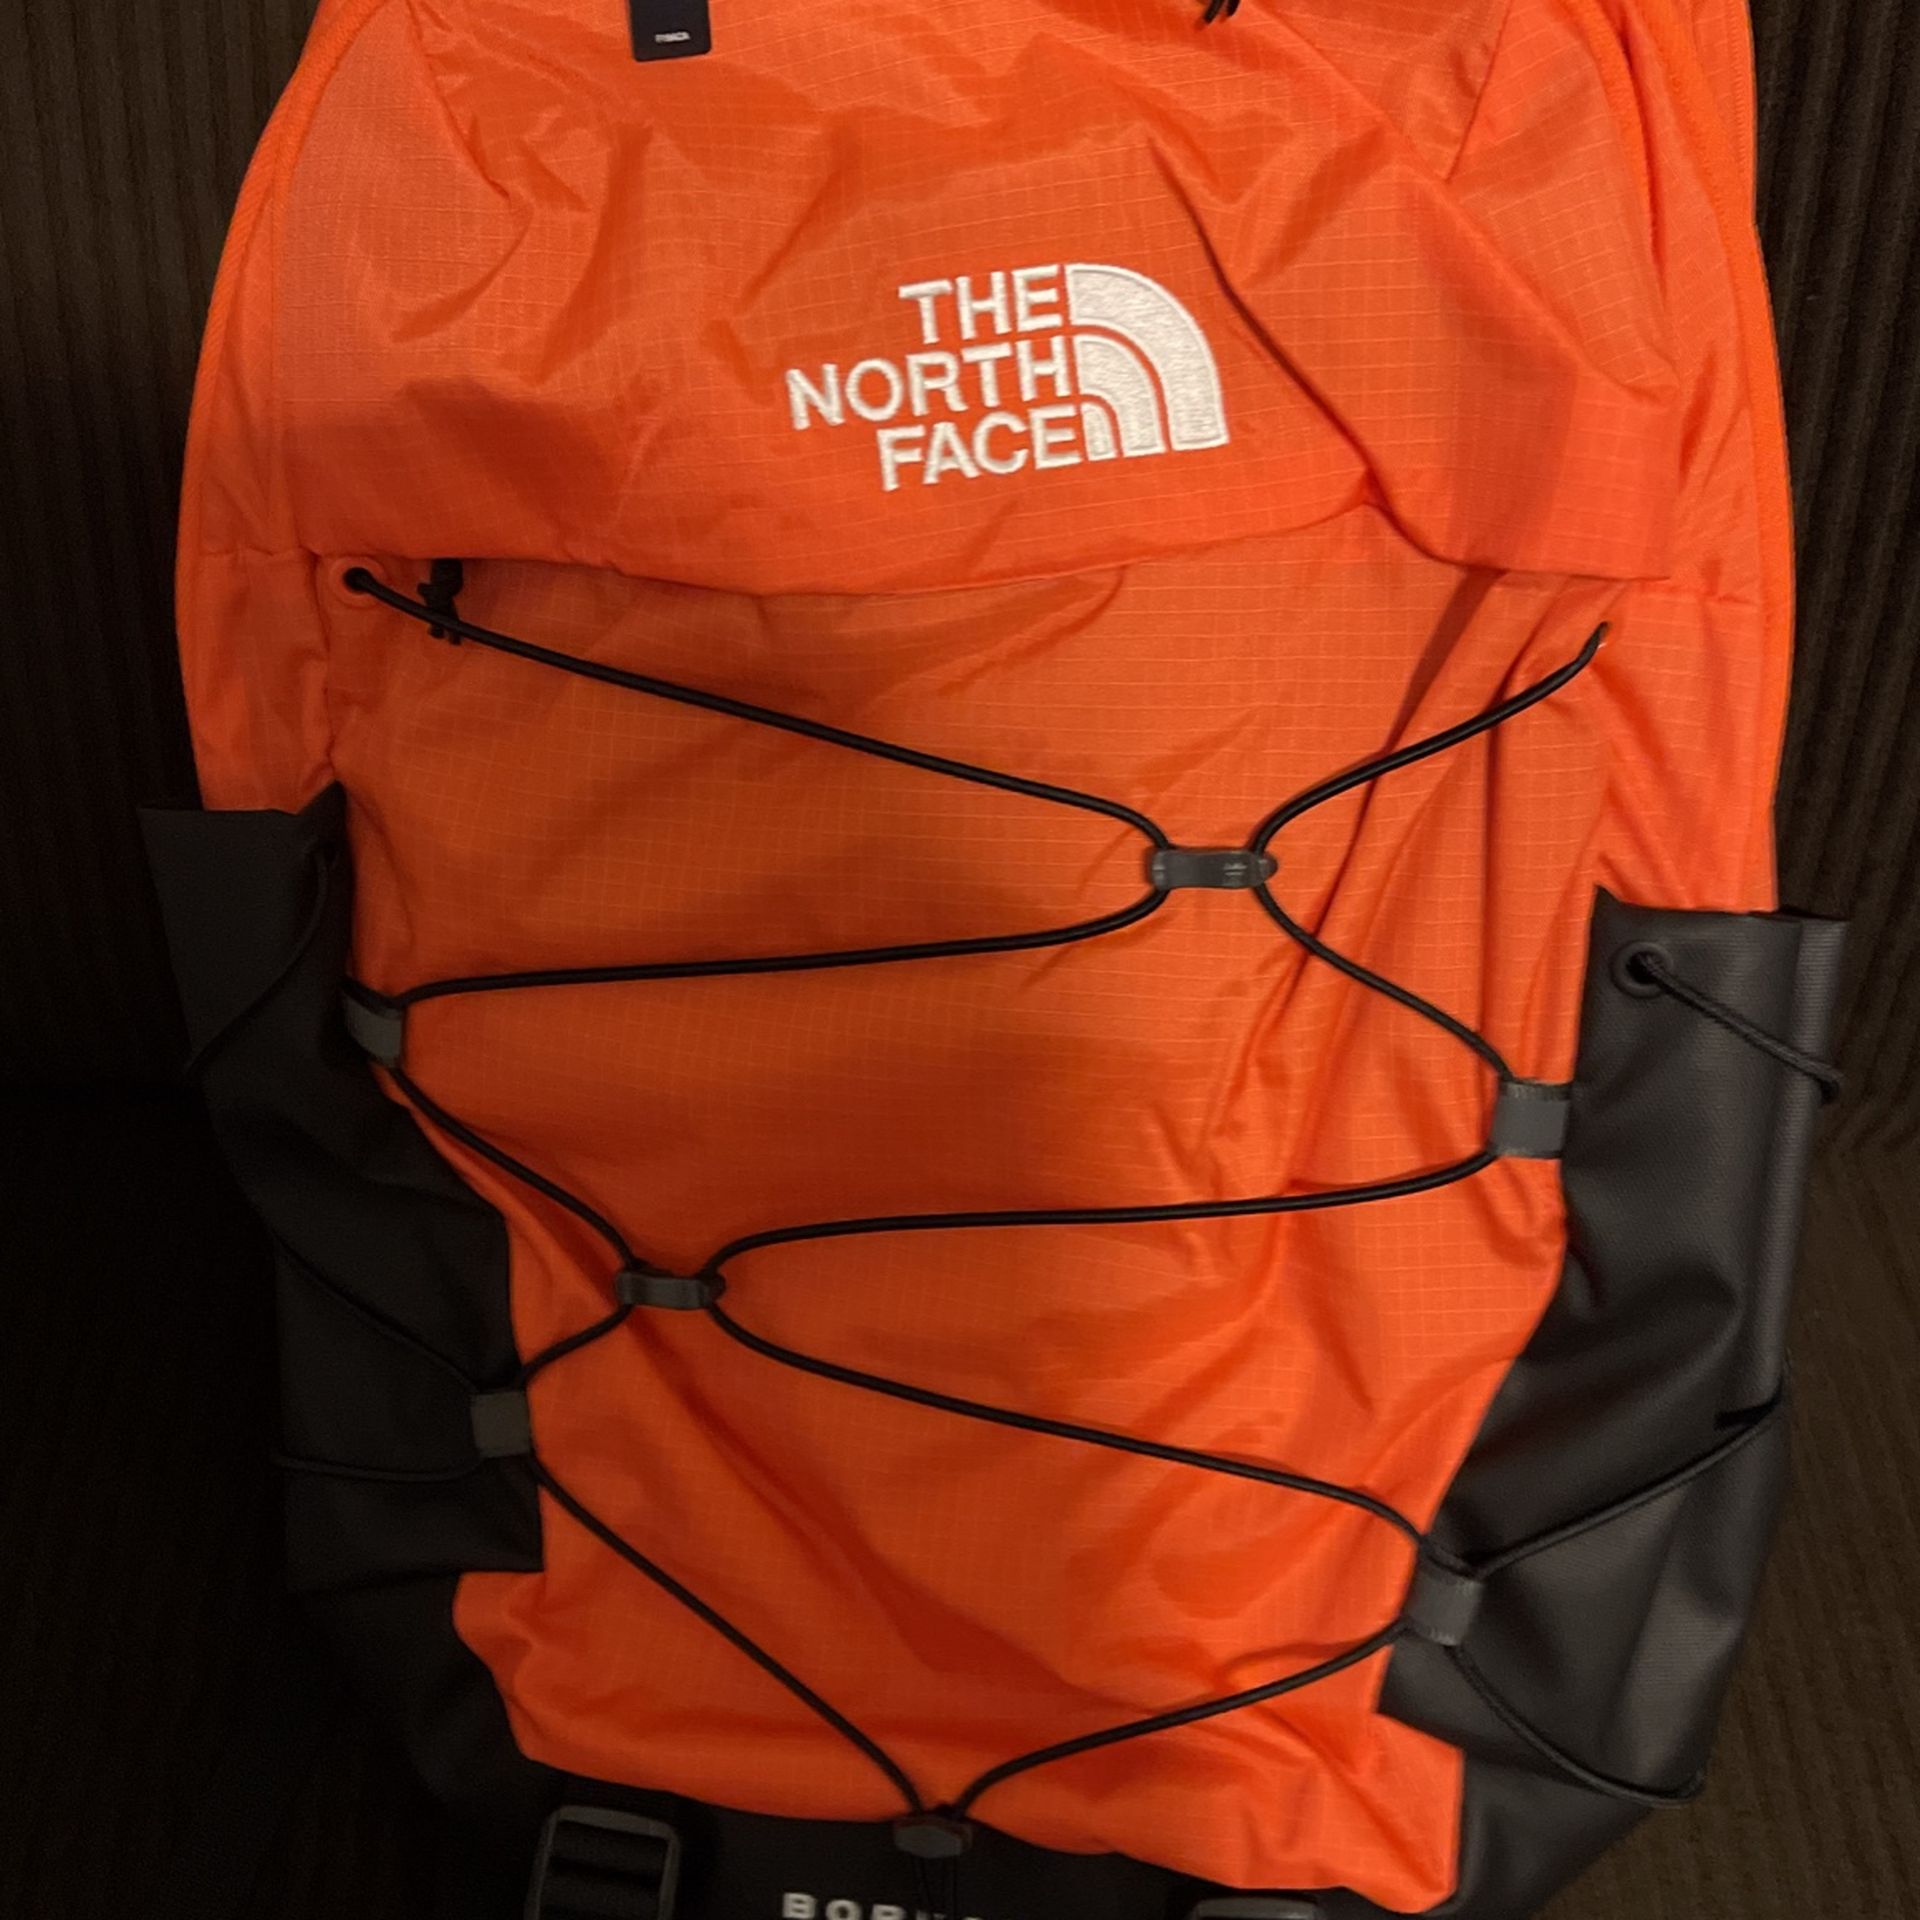 NWT The North Face Borealis Backpack. No Deliveries